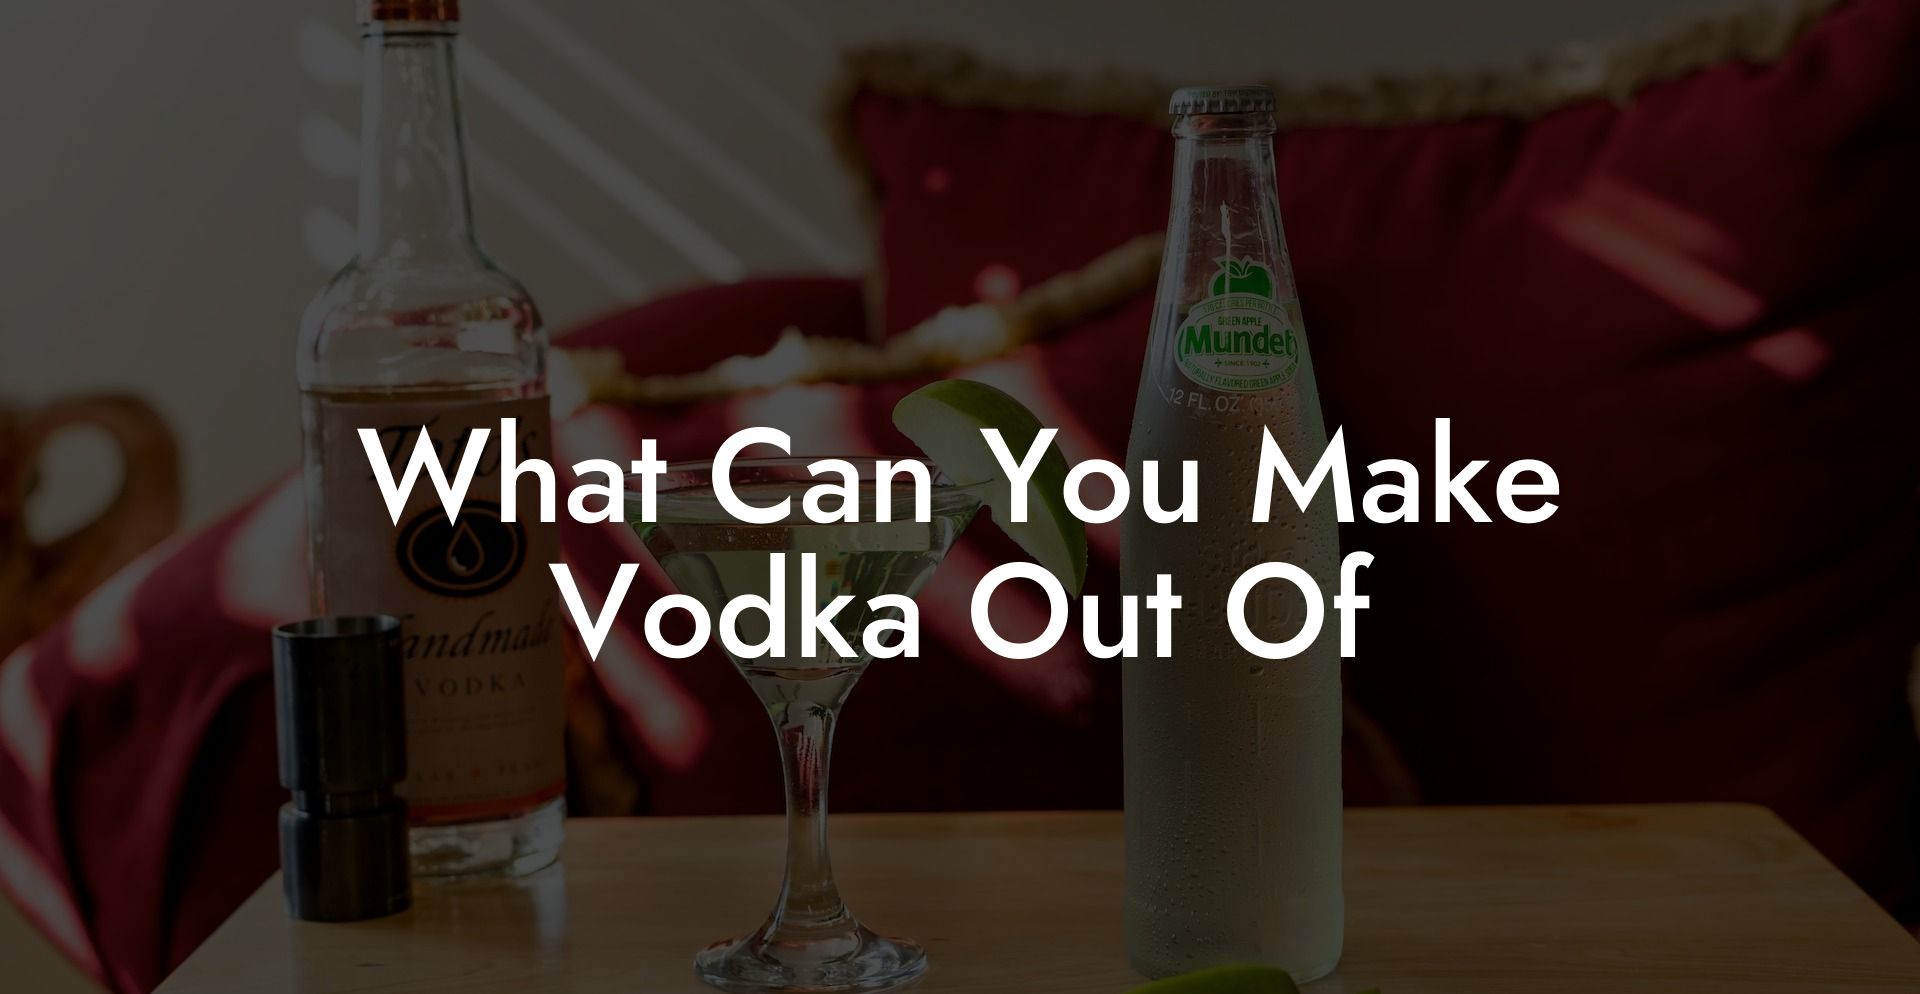 What Can You Make Vodka Out Of